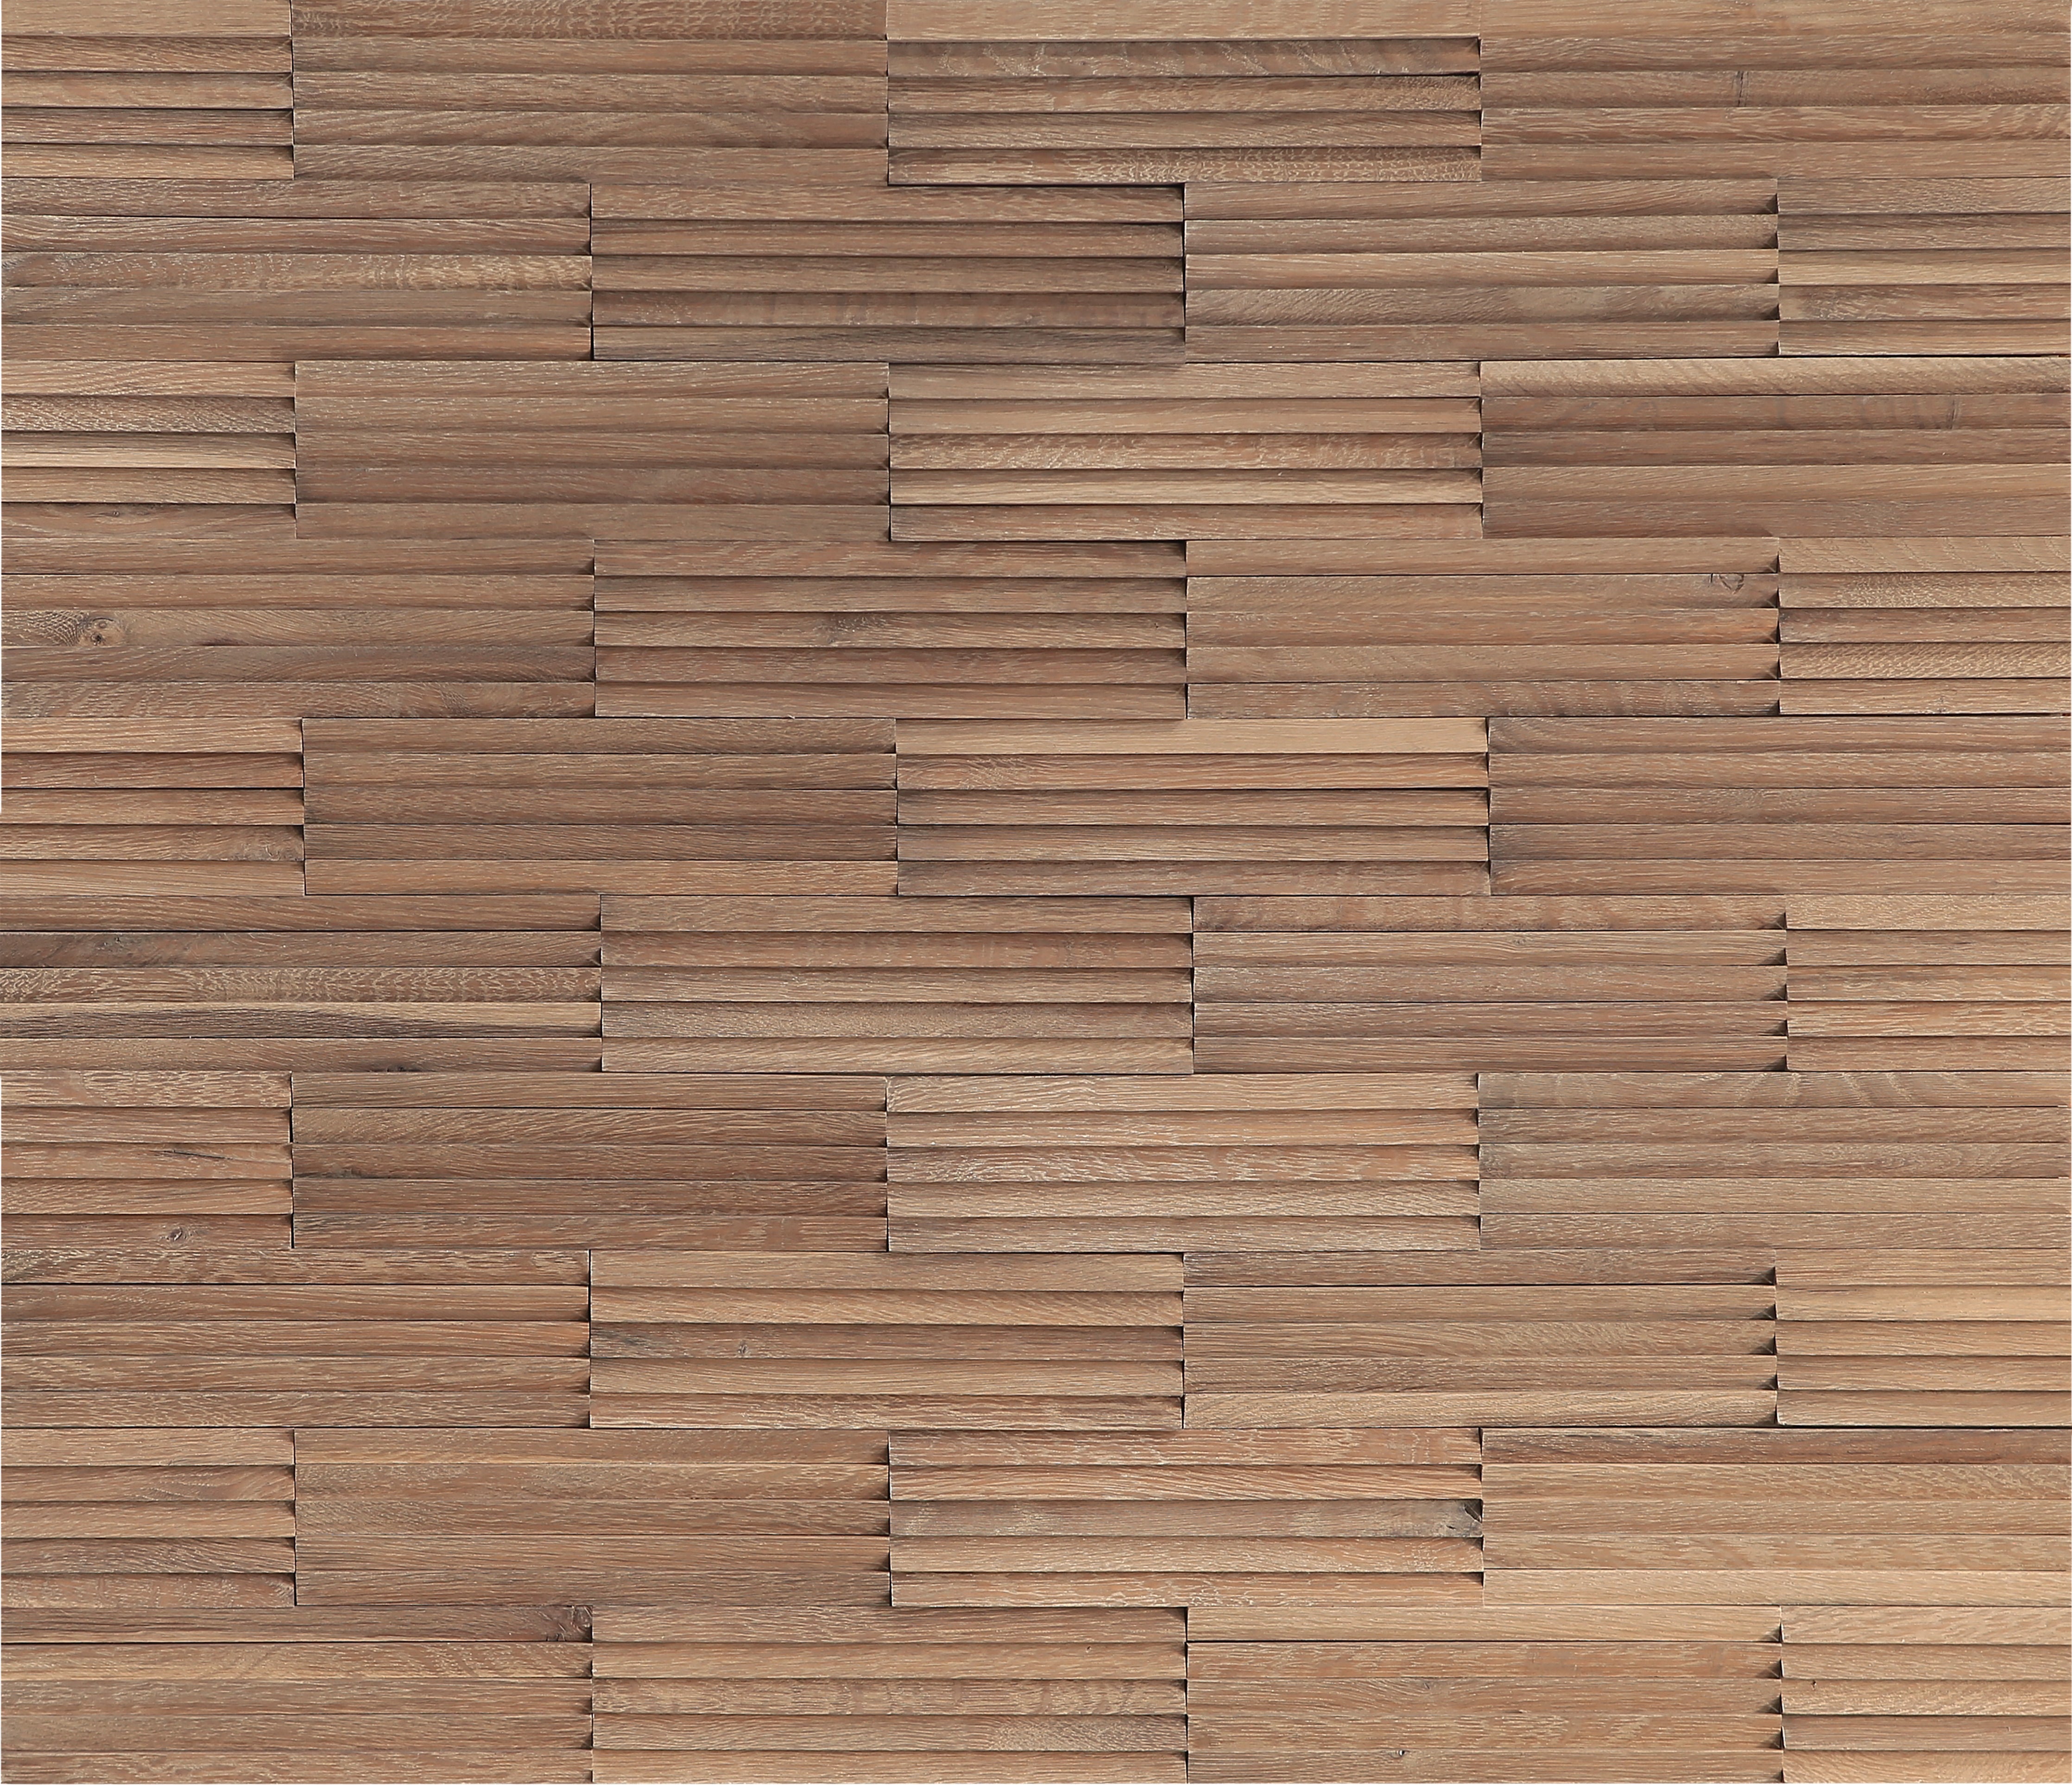 duchateau inceptiv vertex lugano oak three dimensional wall natural wood panel matte lacquer for interior use distributed by surface group international